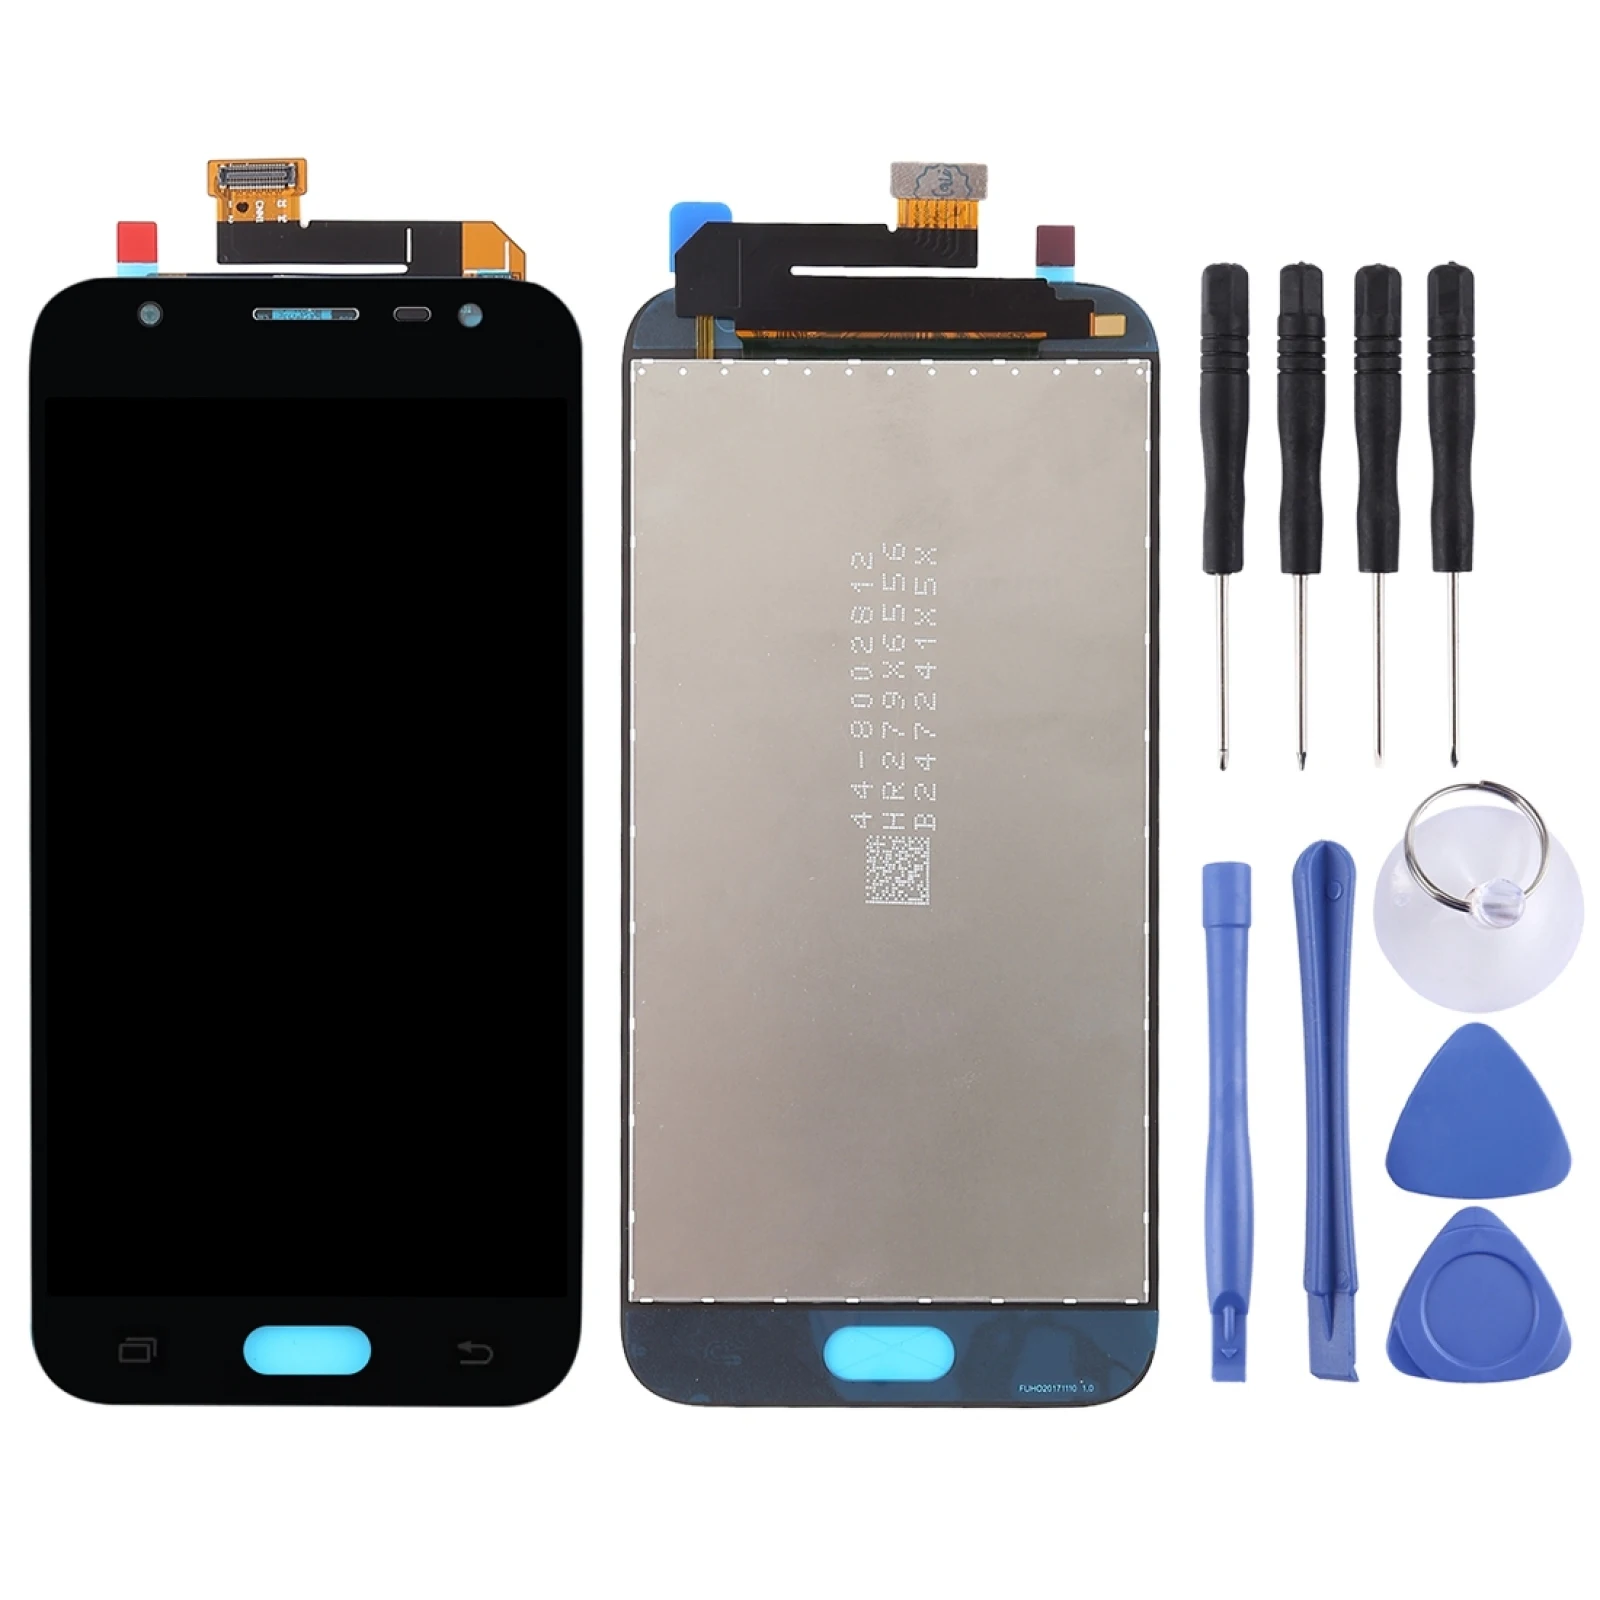 LCD Screen for Galaxy J3 (2017), J330F/DS, J330G/DS with Digitizer Full Assembly